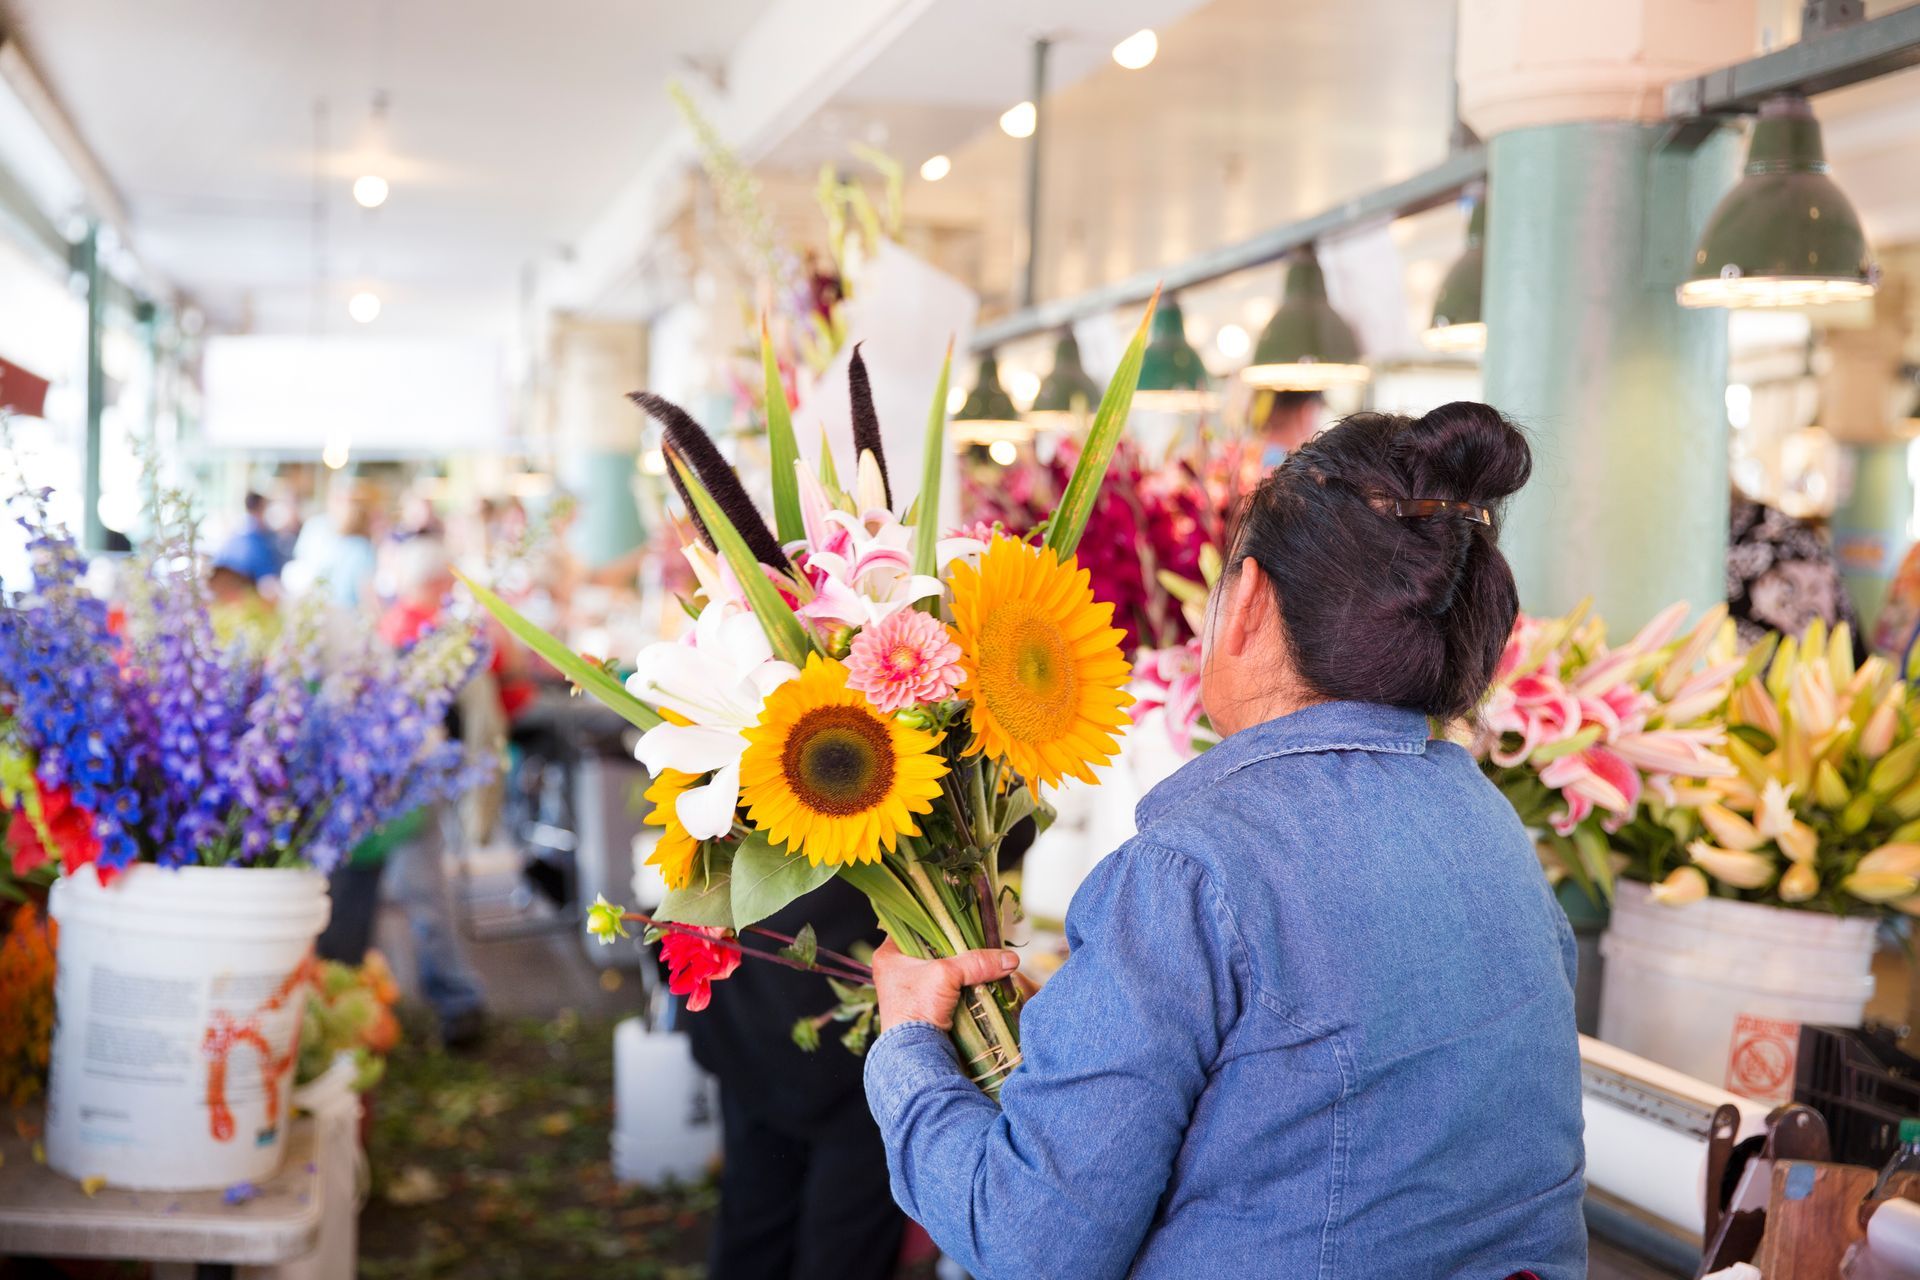 A woman is holding a bouquet of flowers in a flower shop.